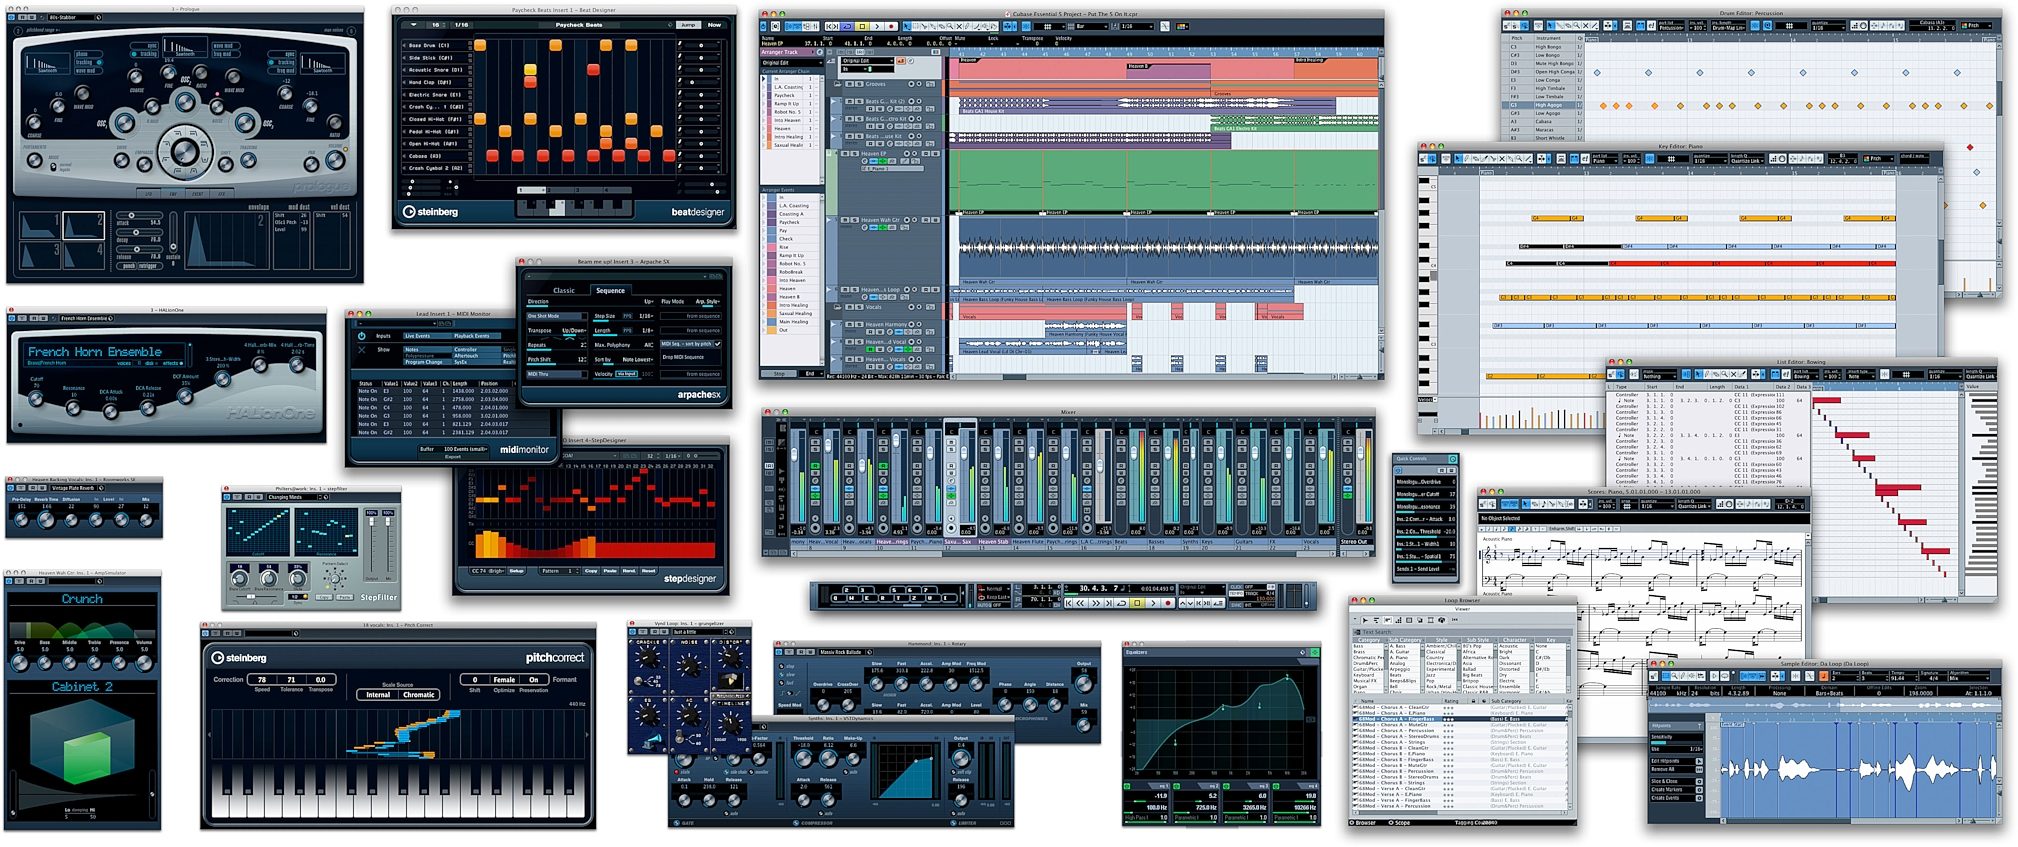 Steinberg Cubase 5 Essential Software | zZounds